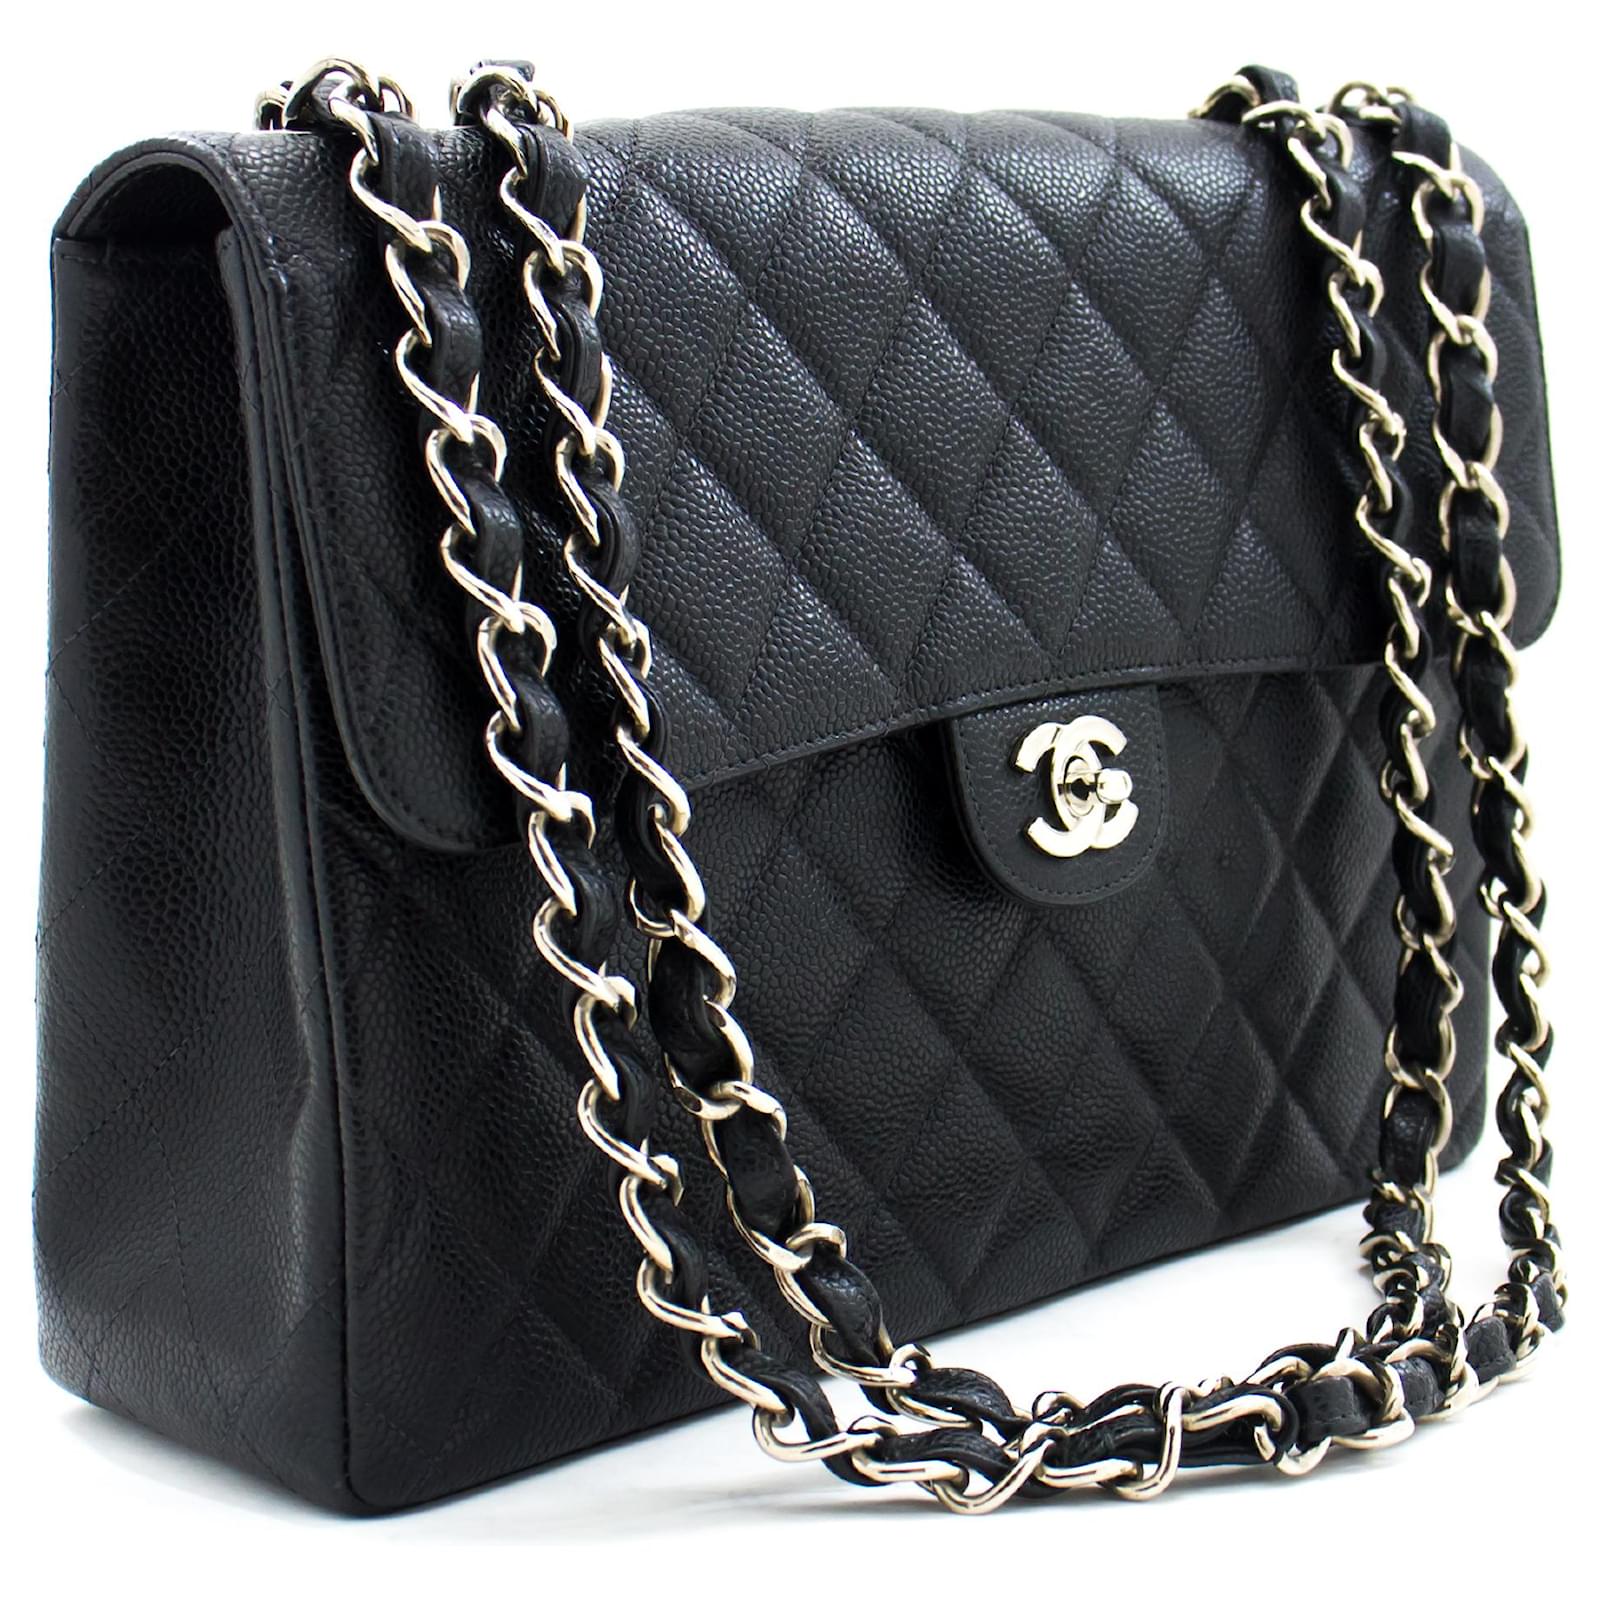 Handbags Chanel Chanel Classic Large 11 Chain Shoulder Bag Black Grained Calf Leather